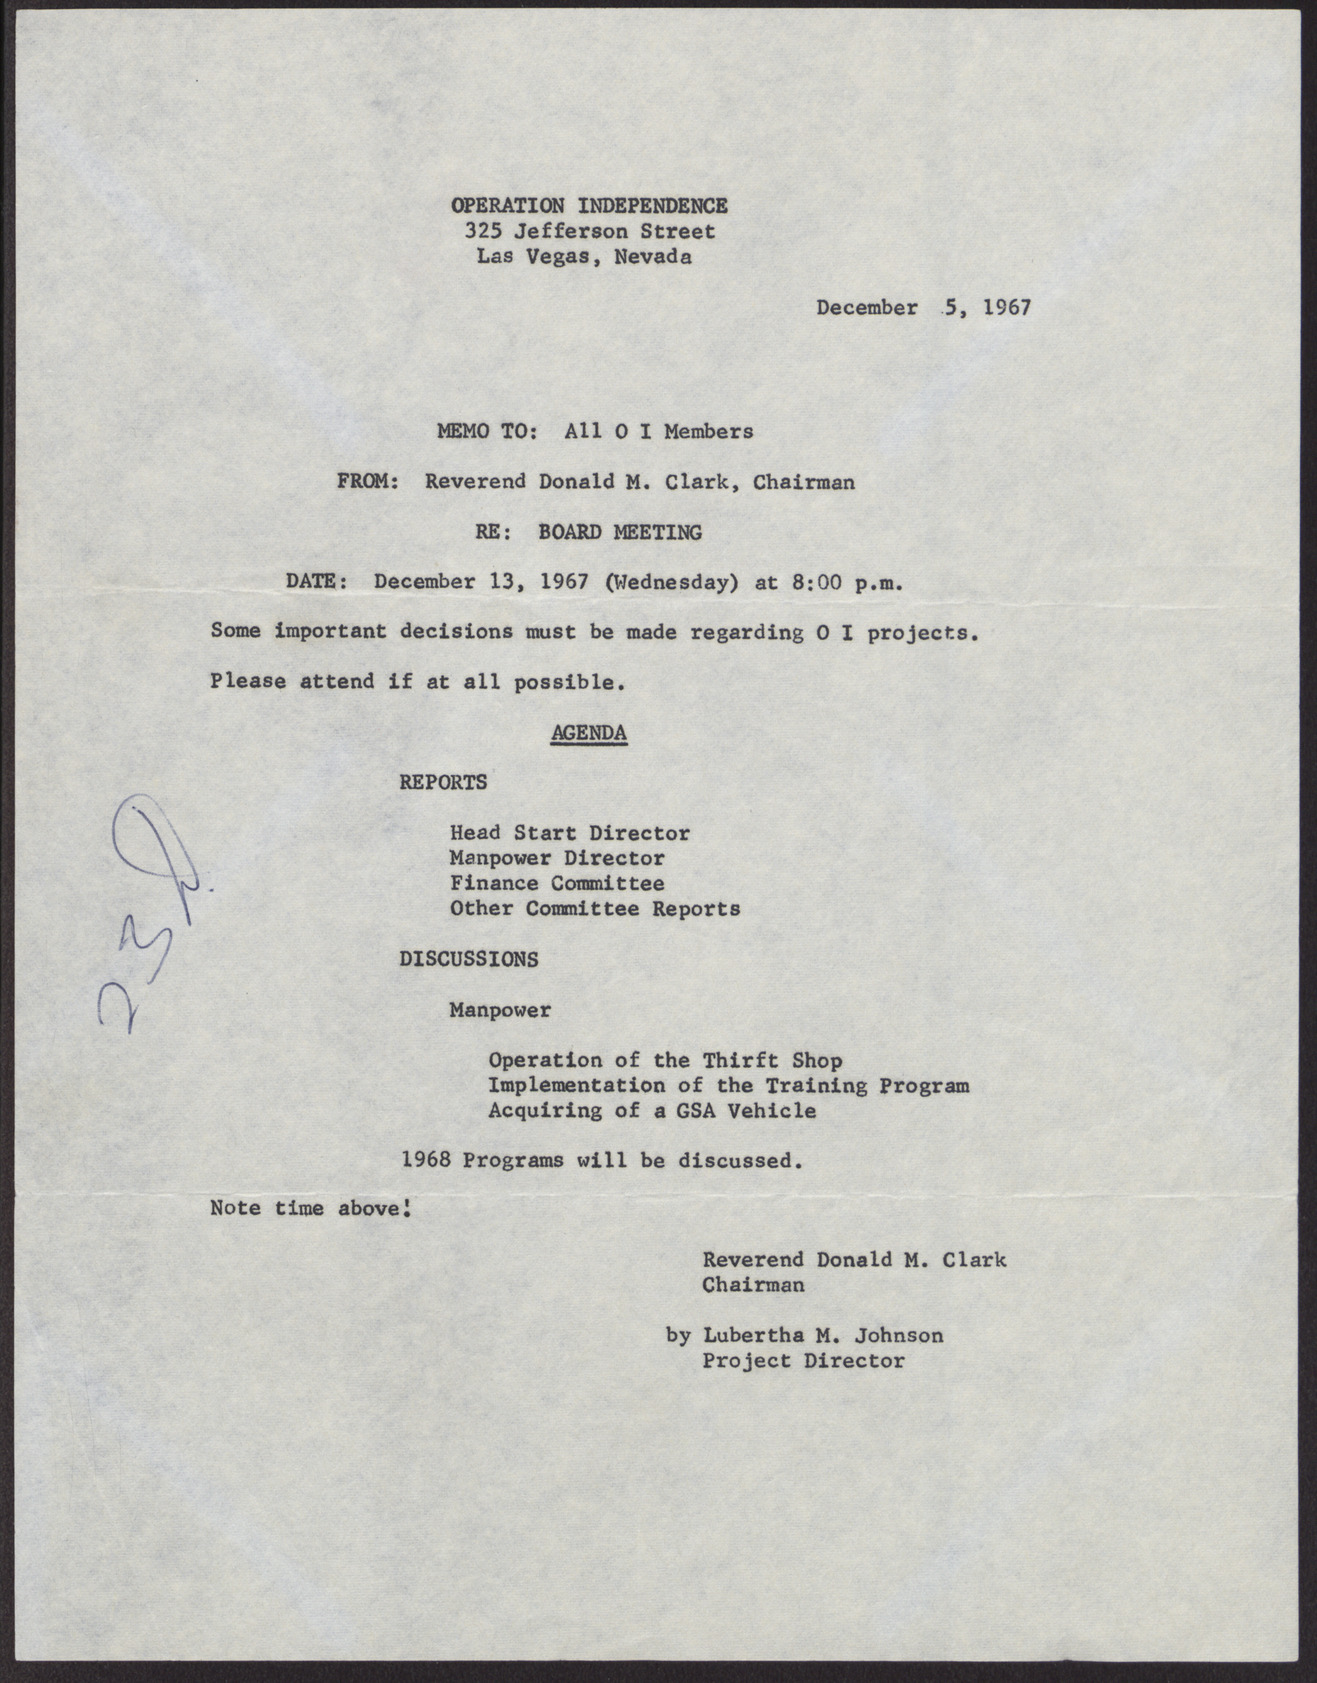 Memo to all Operation Independence Members from Reverend Donald M. Clark, December 5, 1967